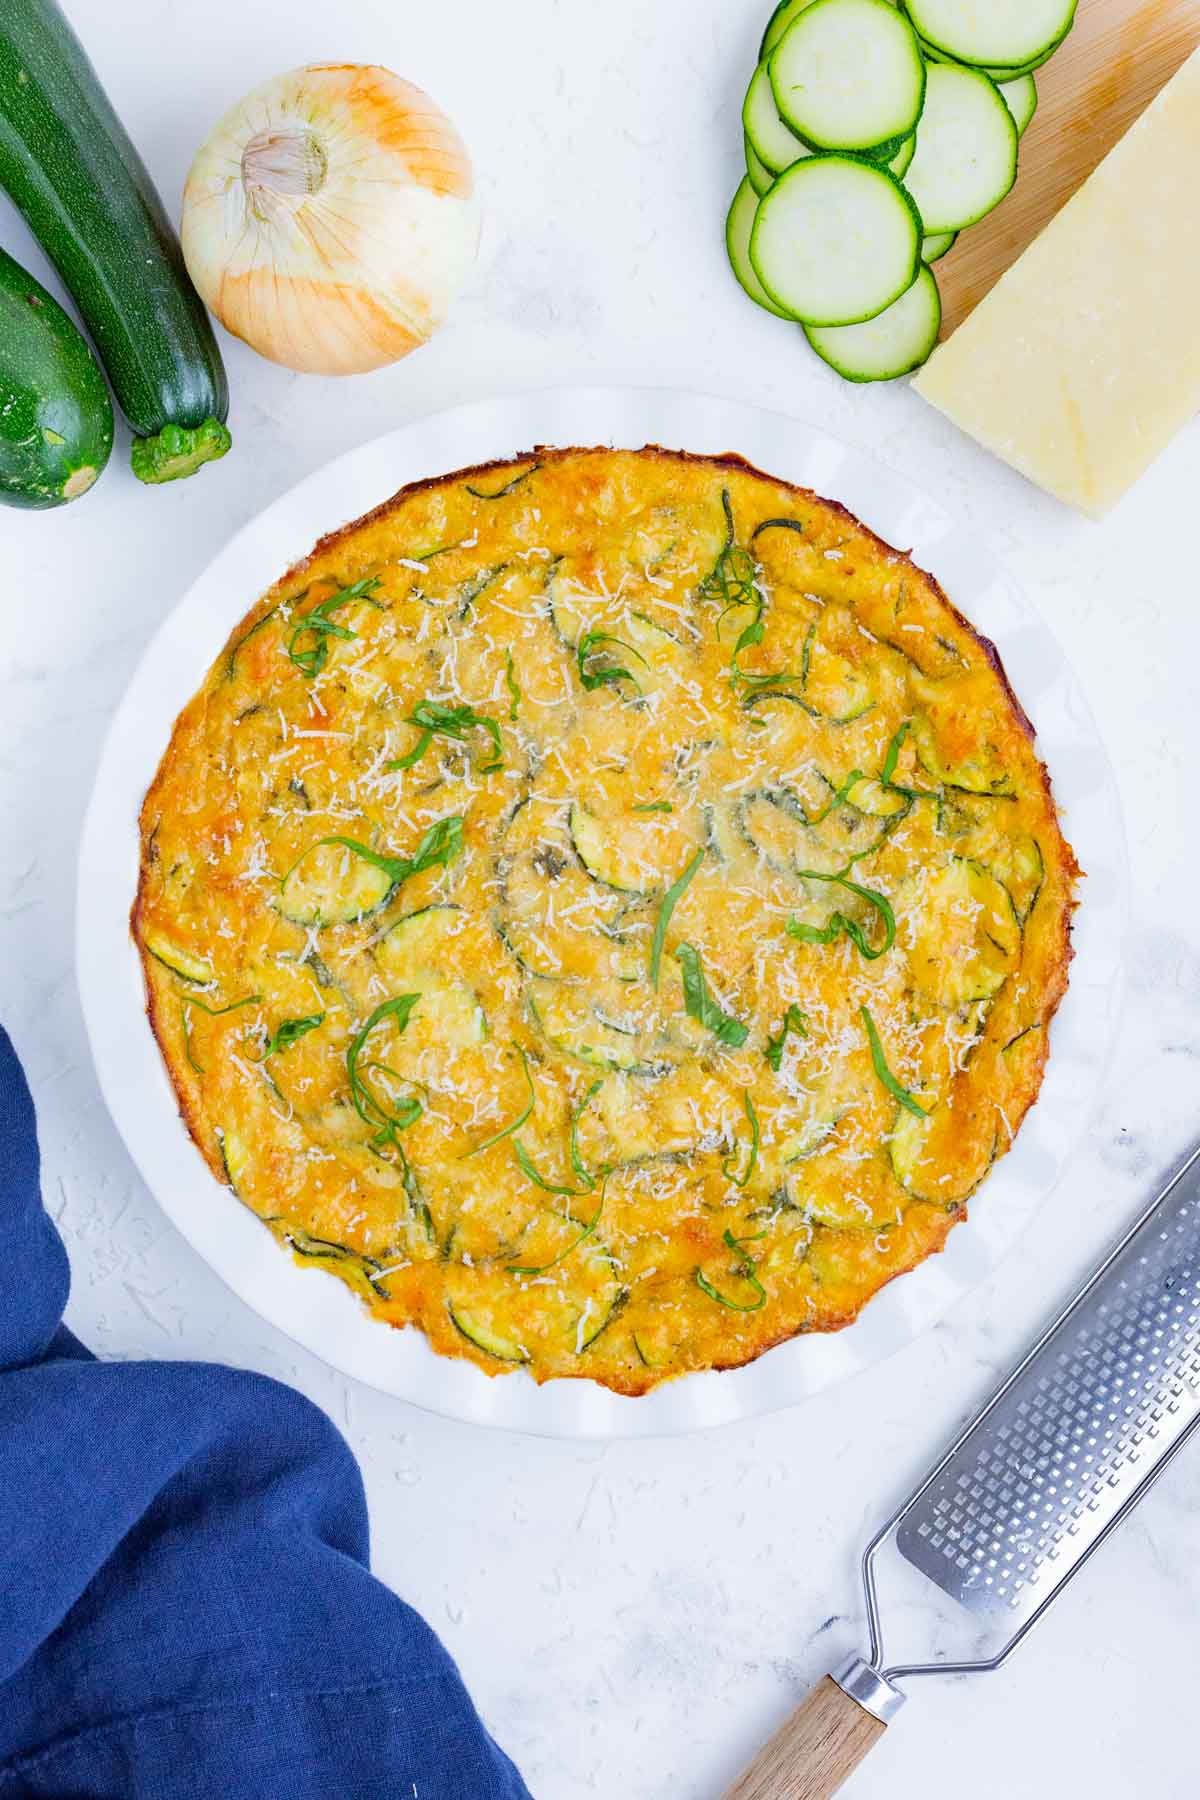 Zucchini pie is a savory and cheesy side dish you can easily whip up at home.